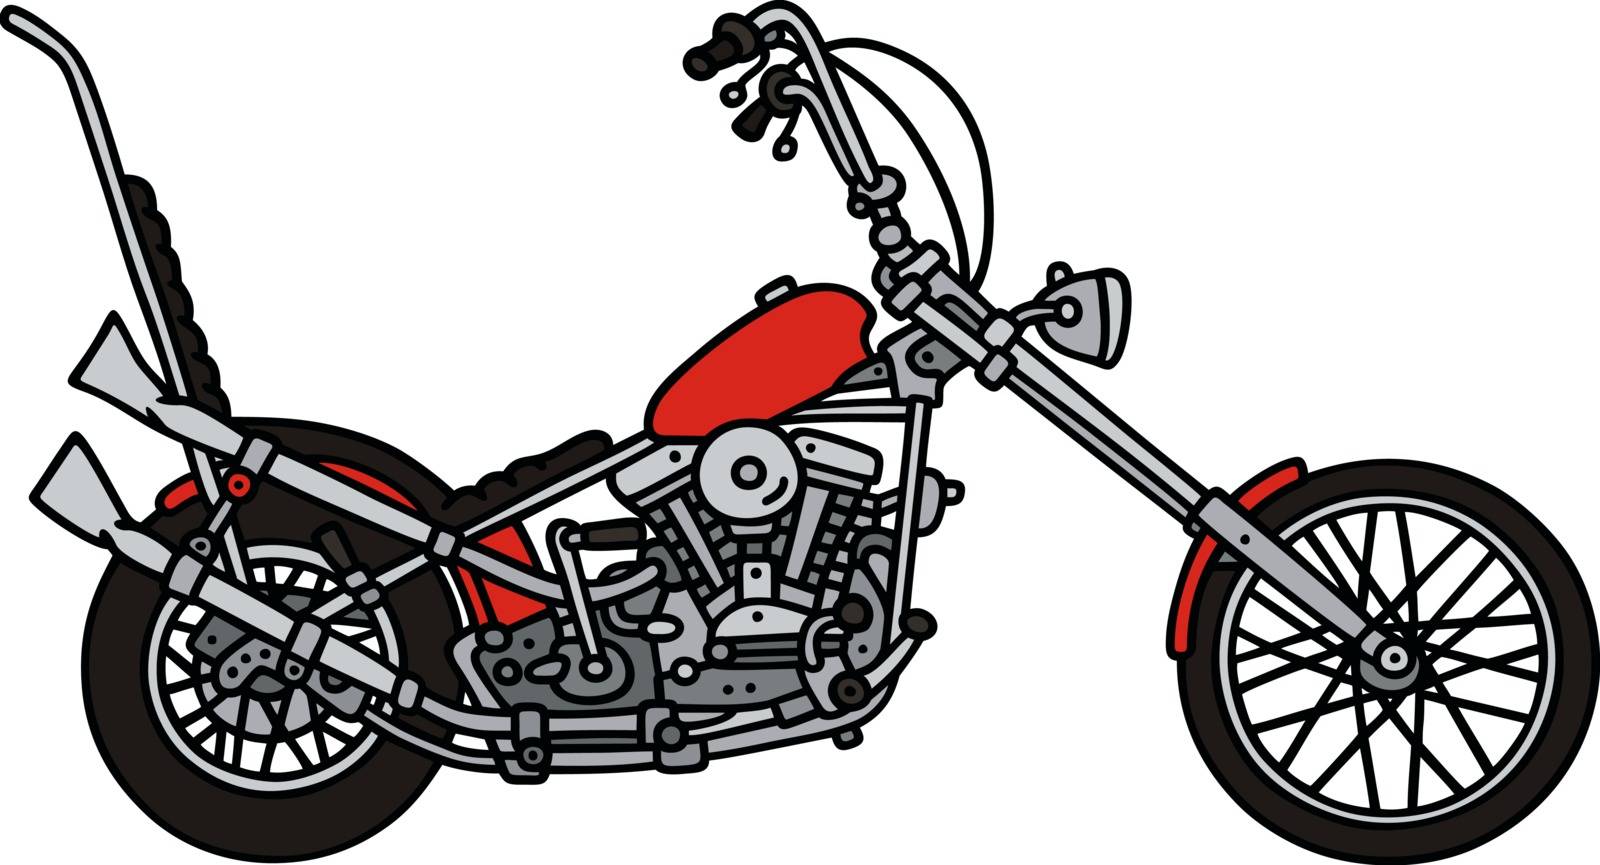 Hand drawing of a classic red chopper - not a real type